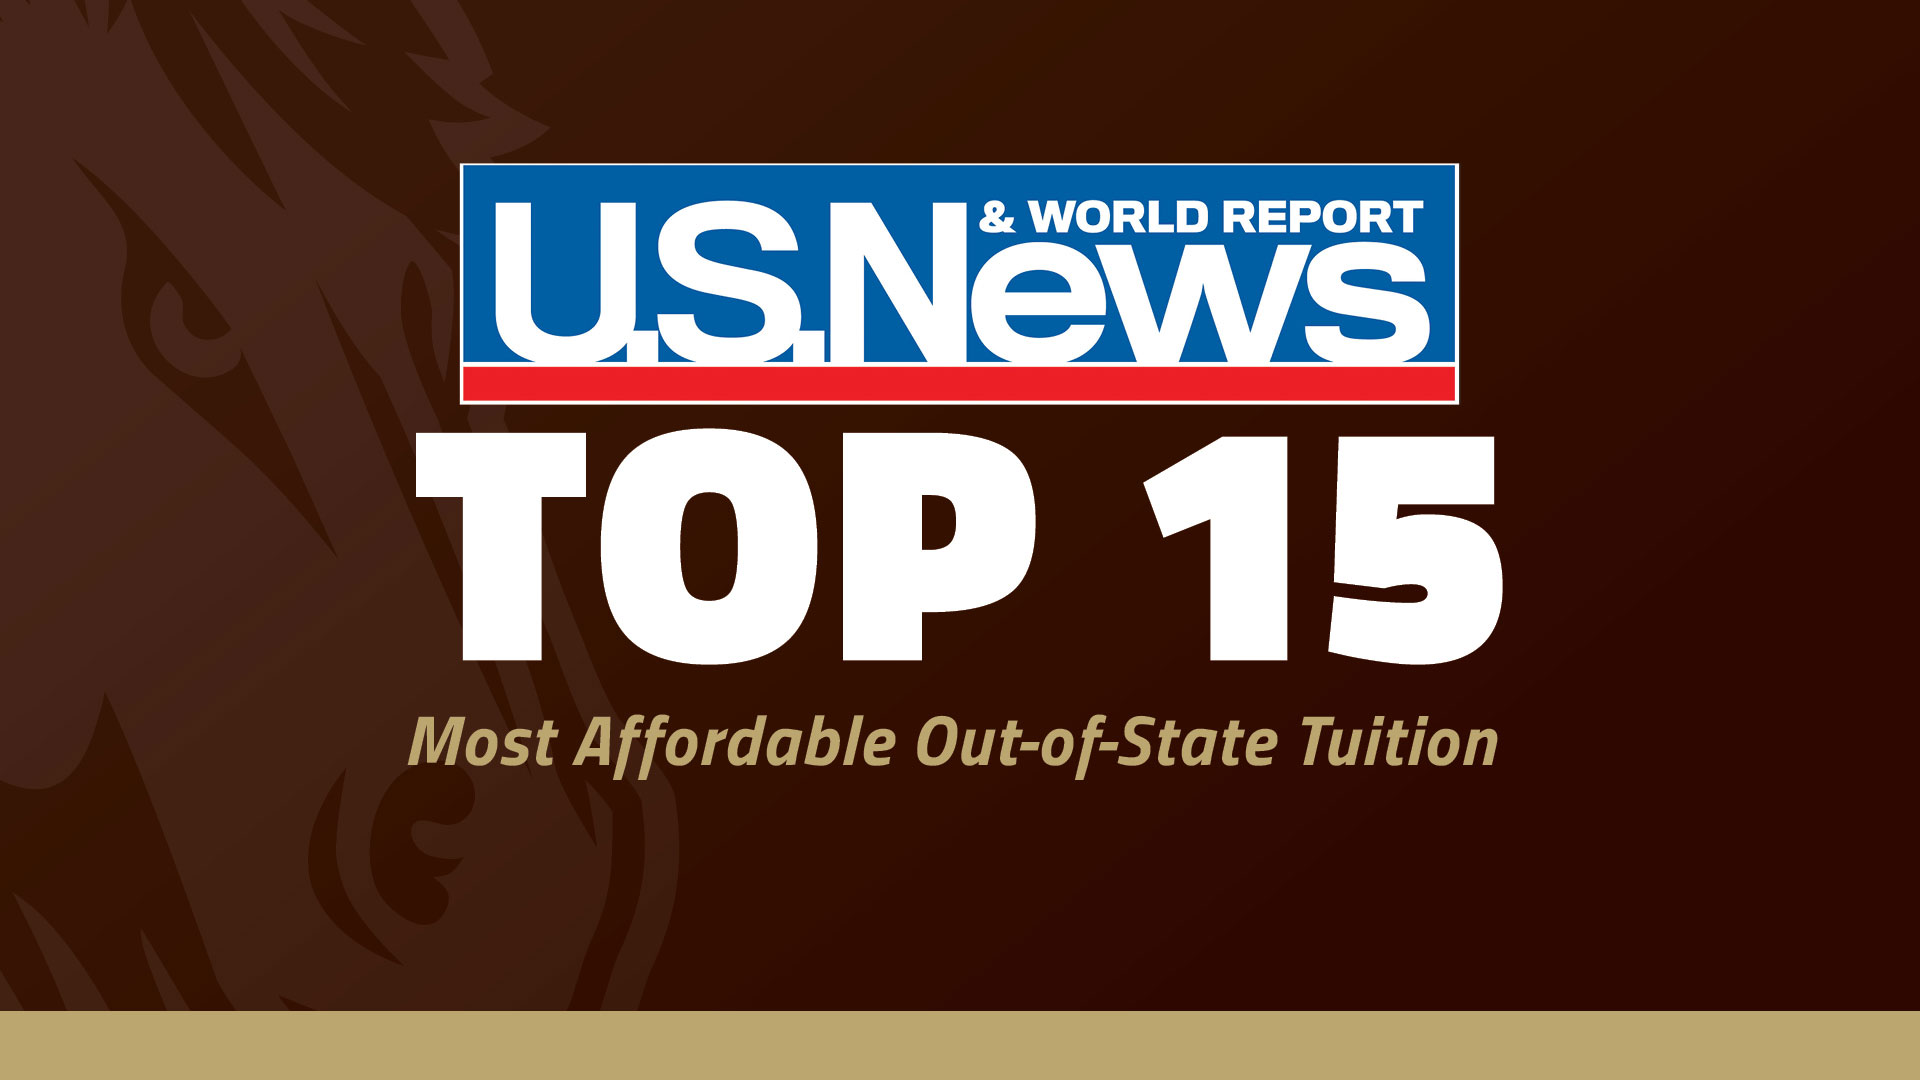 SMSU Ranked Top 15 in Nation: Affordable Out-of-State Tuition Featured Image